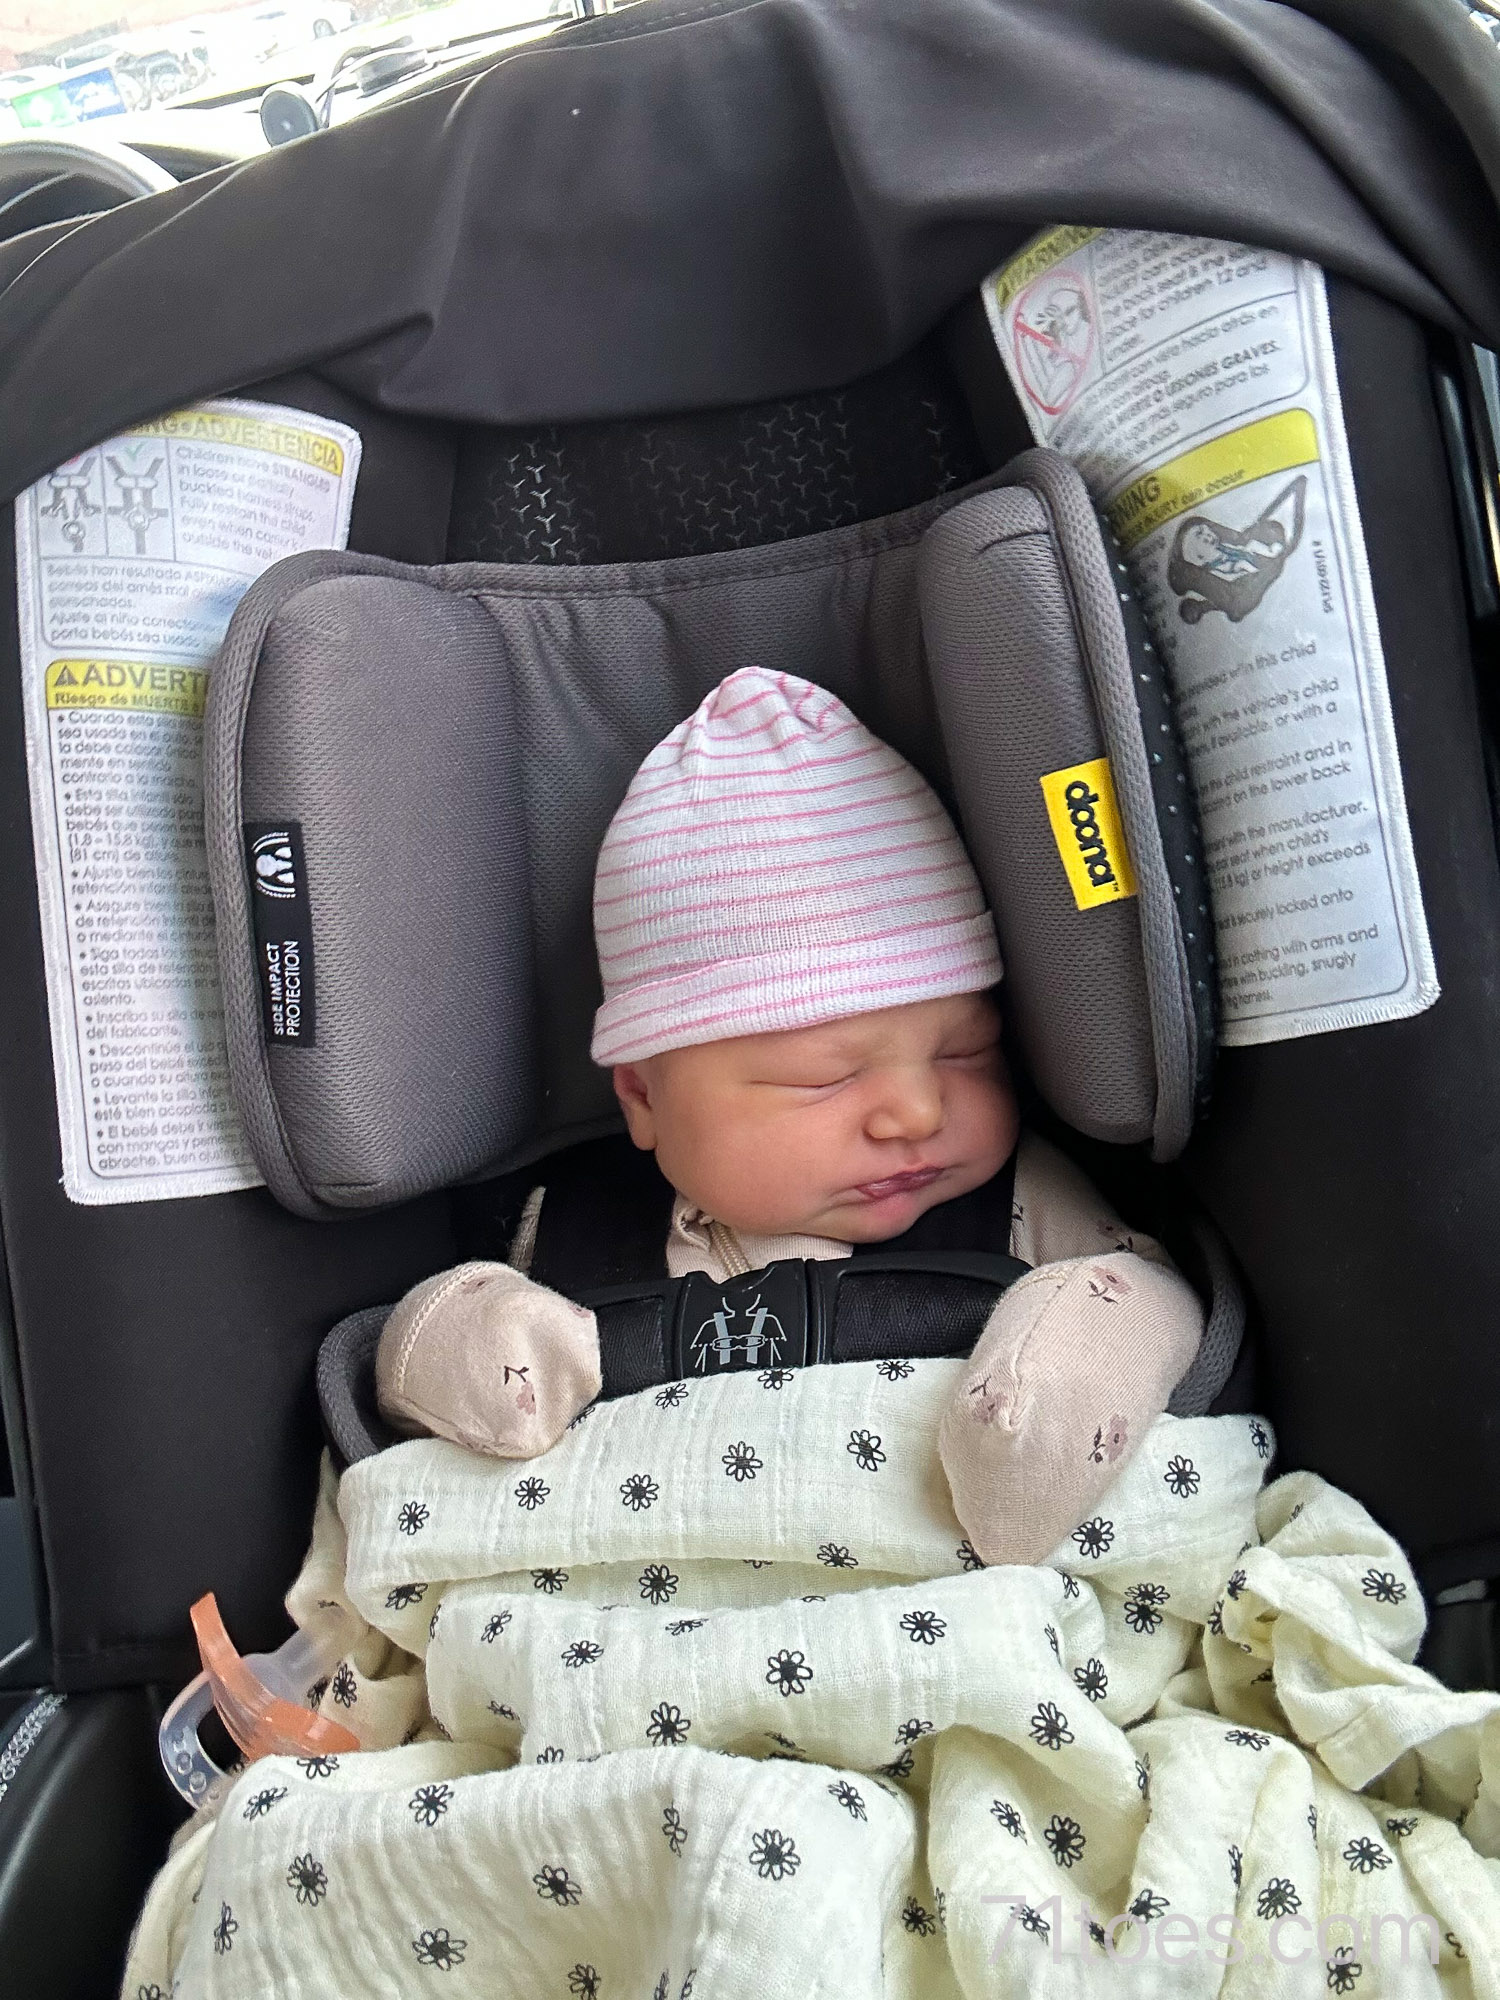 Murphy coming home from the hospital in a giant carseat